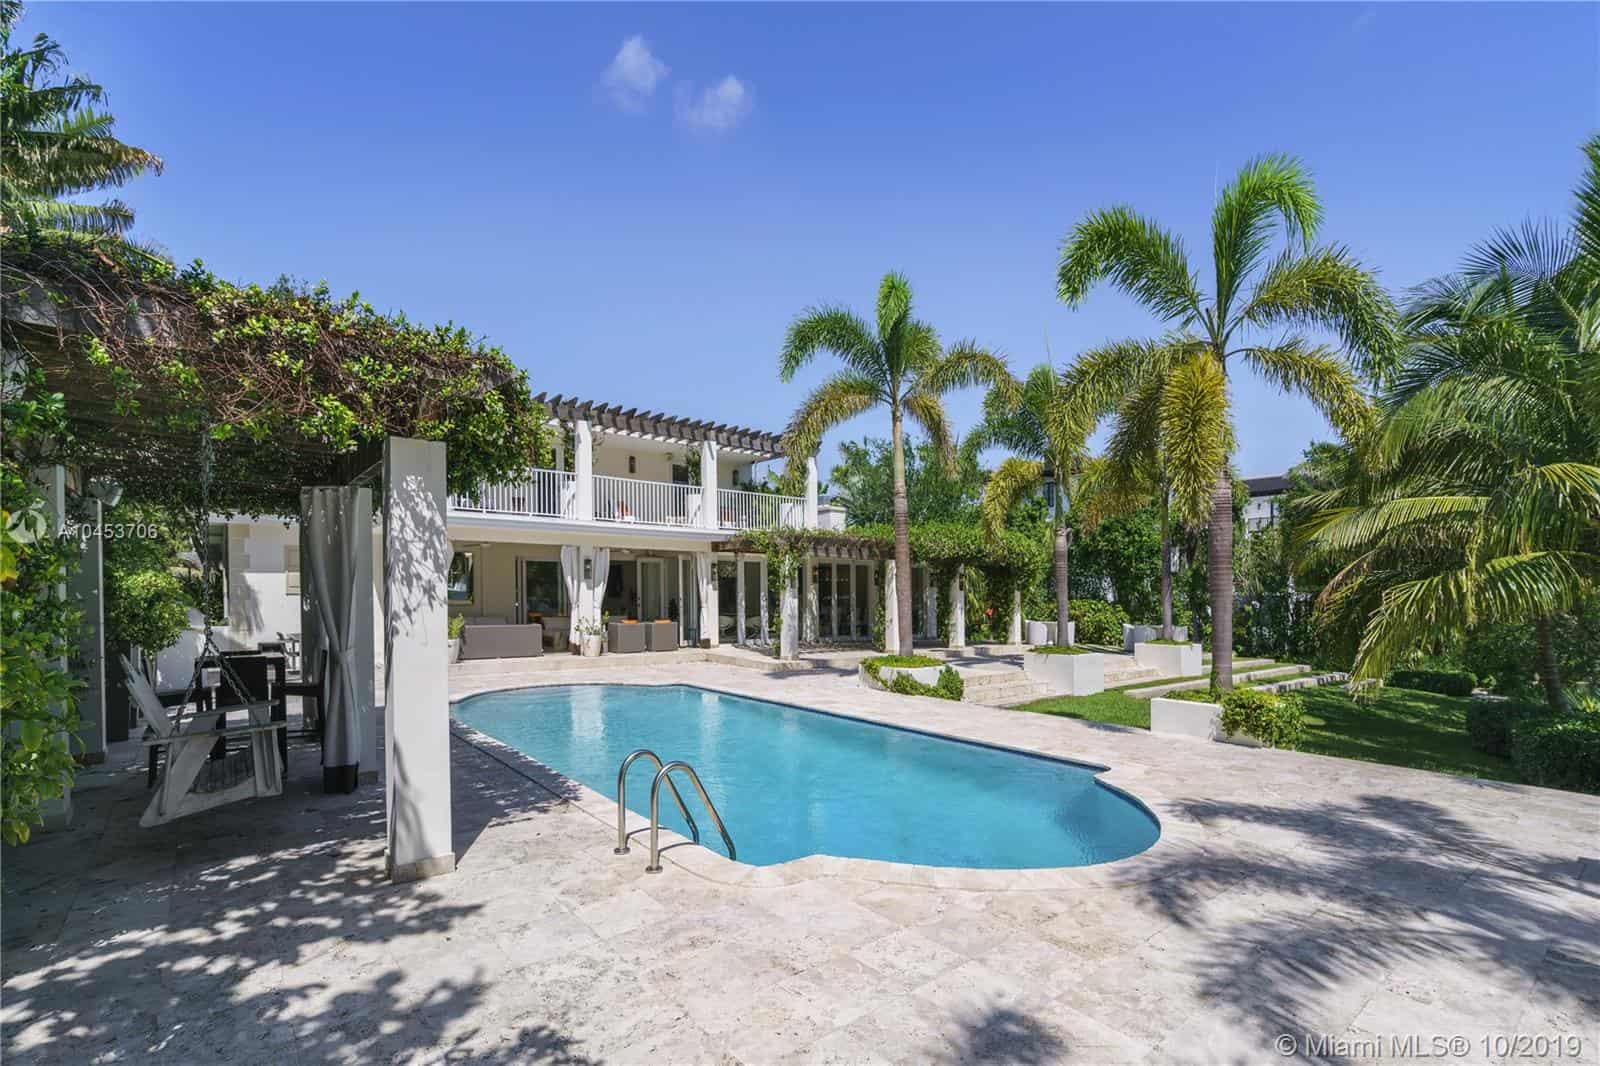 6945 Sunrise Ter, Coral Gables: Ultra-Luxury Homes for Sale in Coral Gables